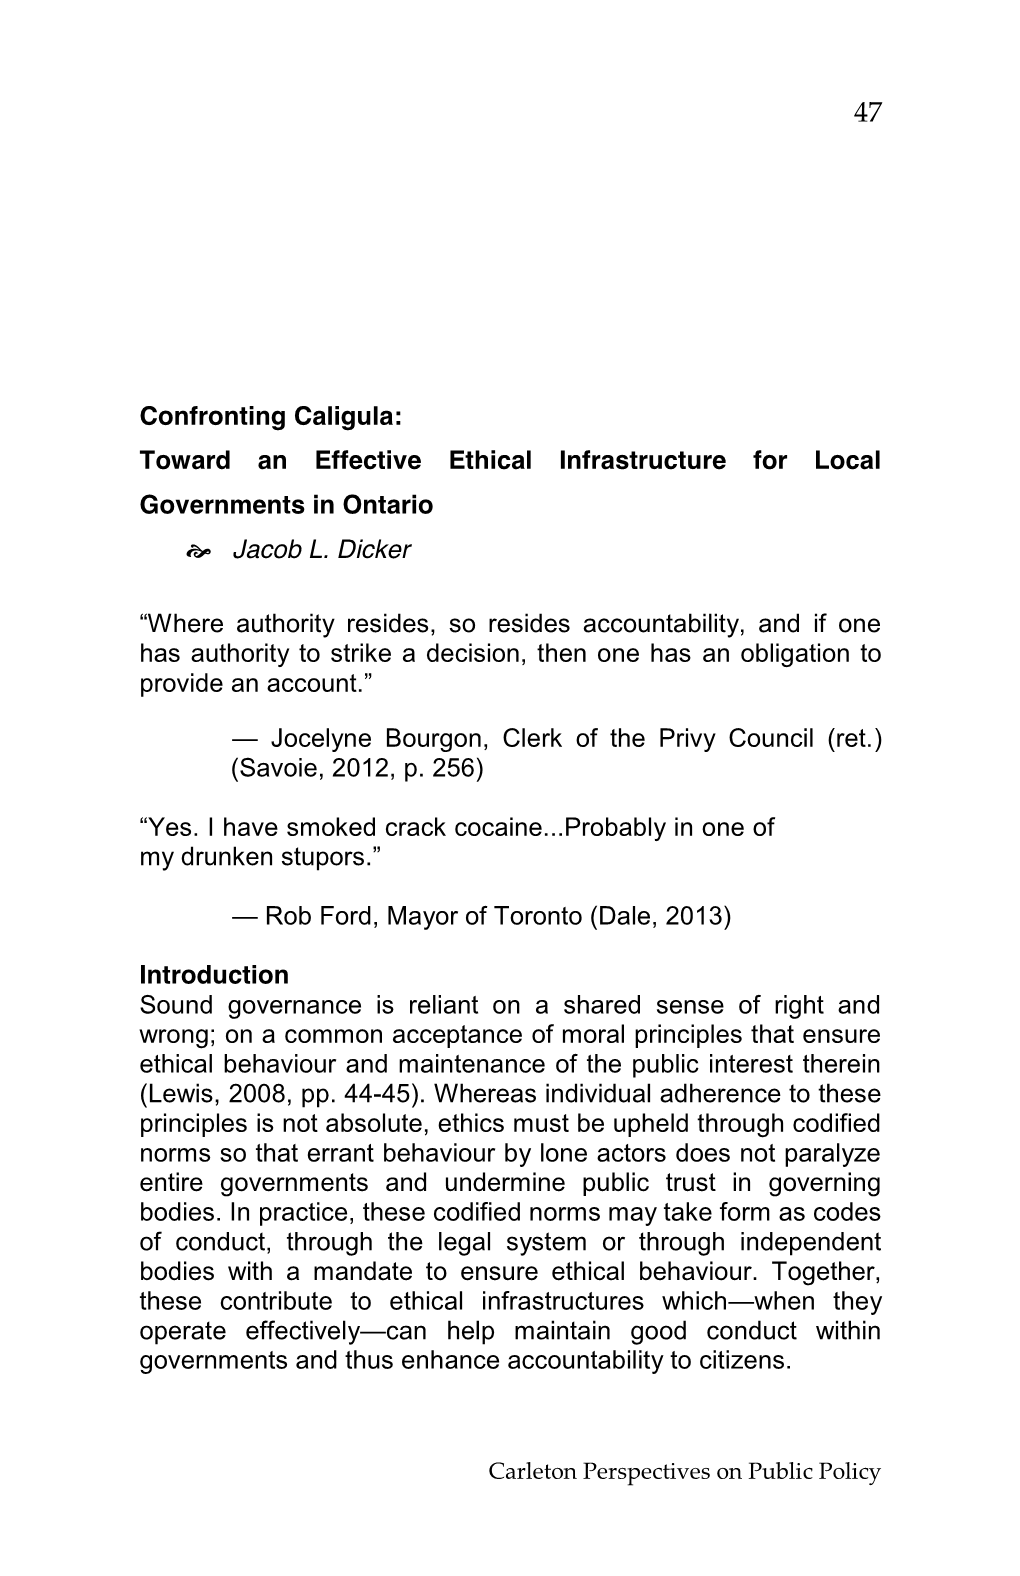 Confronting Caligula: Toward an Effective Ethical Infrastructure for Local Governments in Ontario � Jacob L